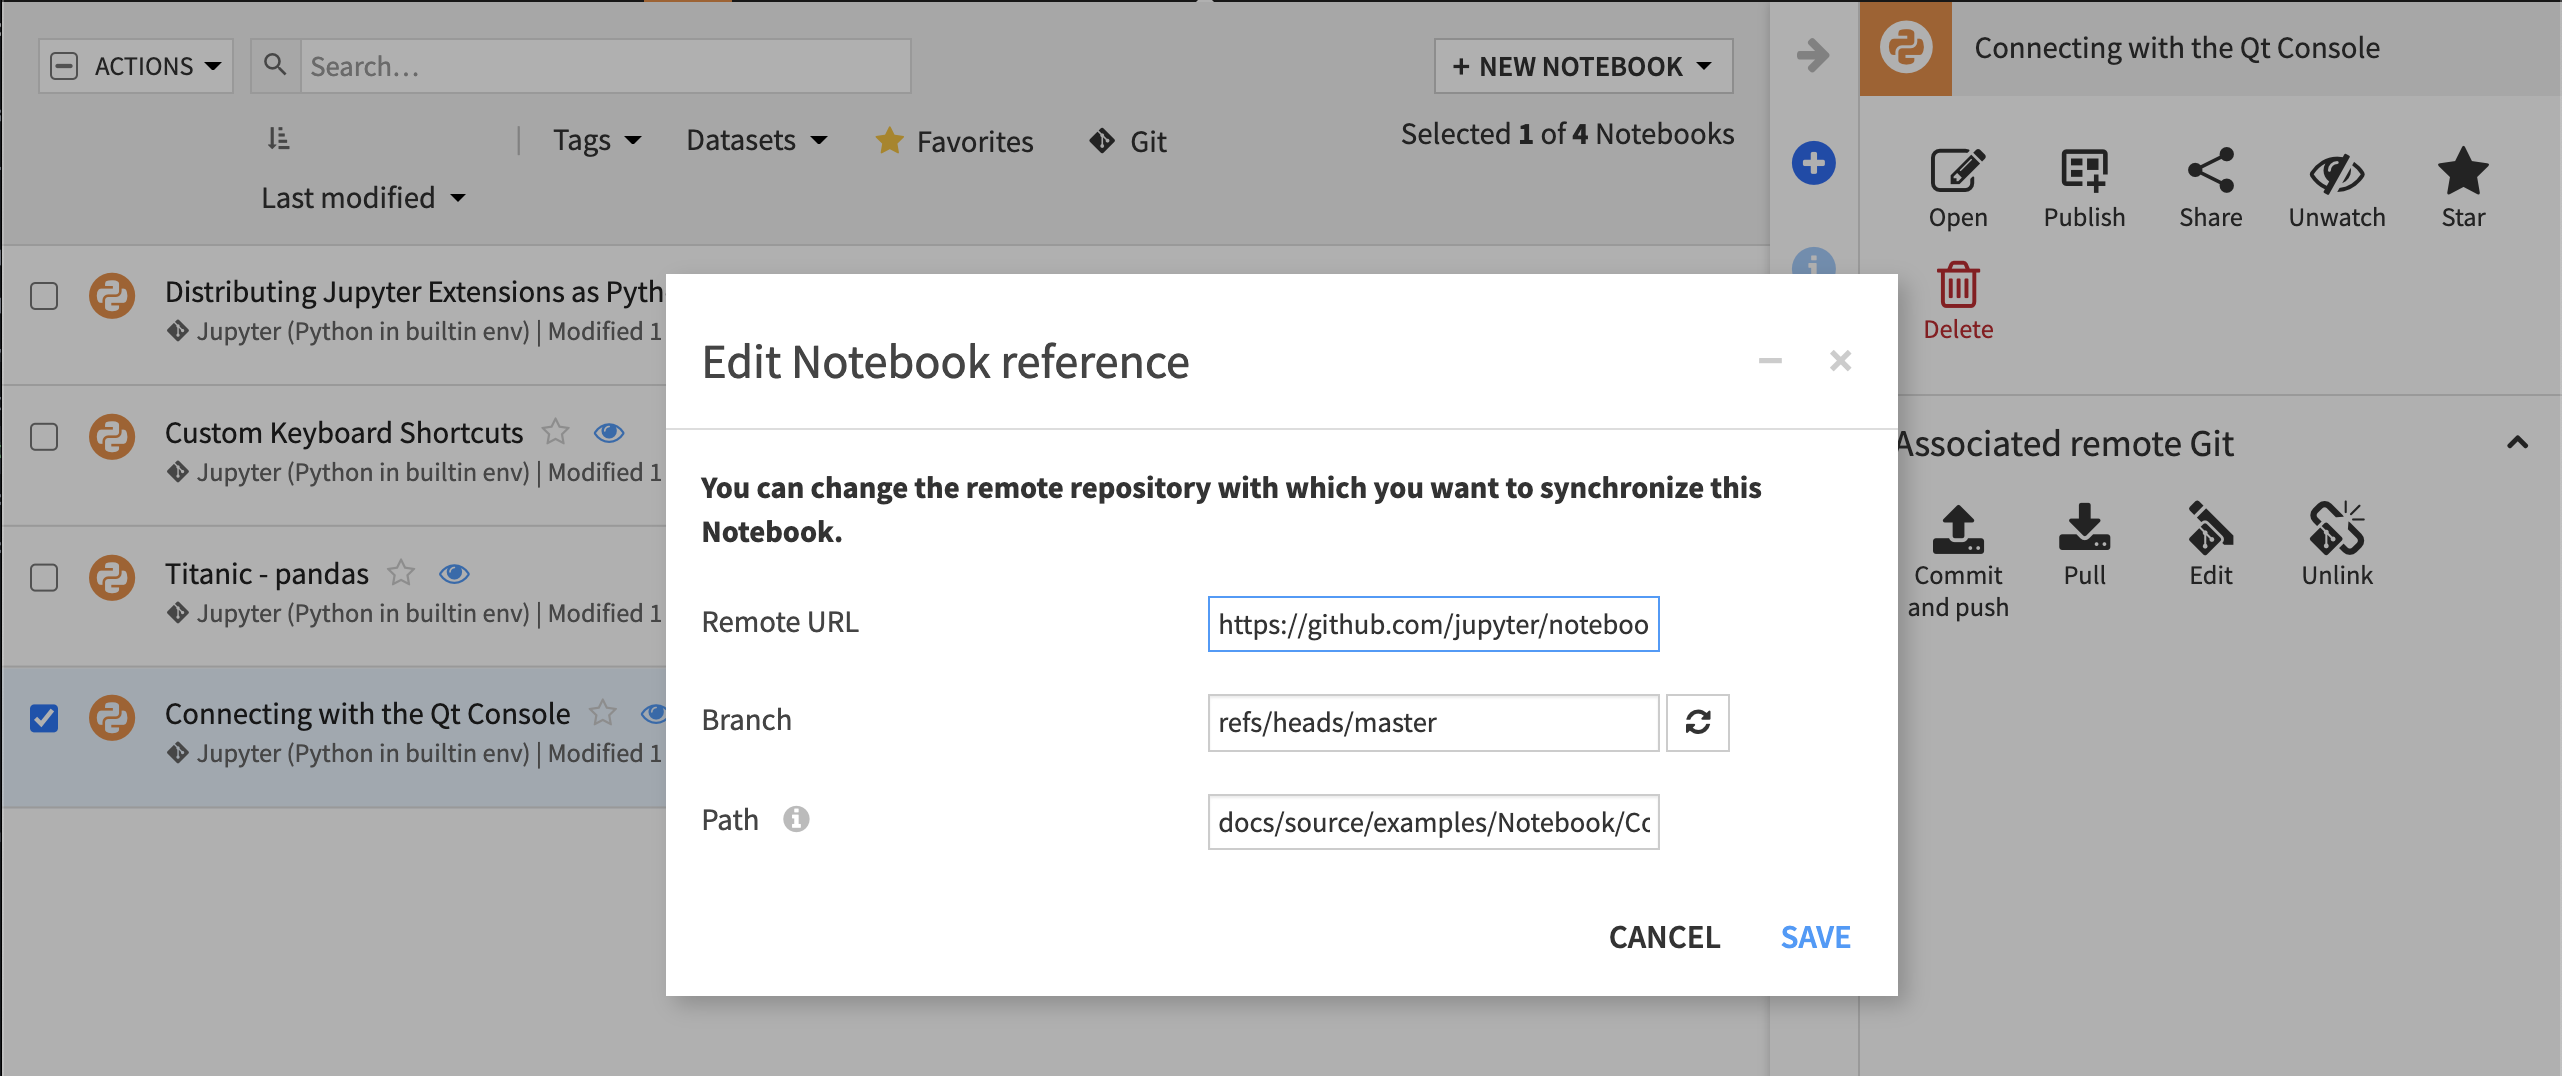 Edit Notebook reference dialog